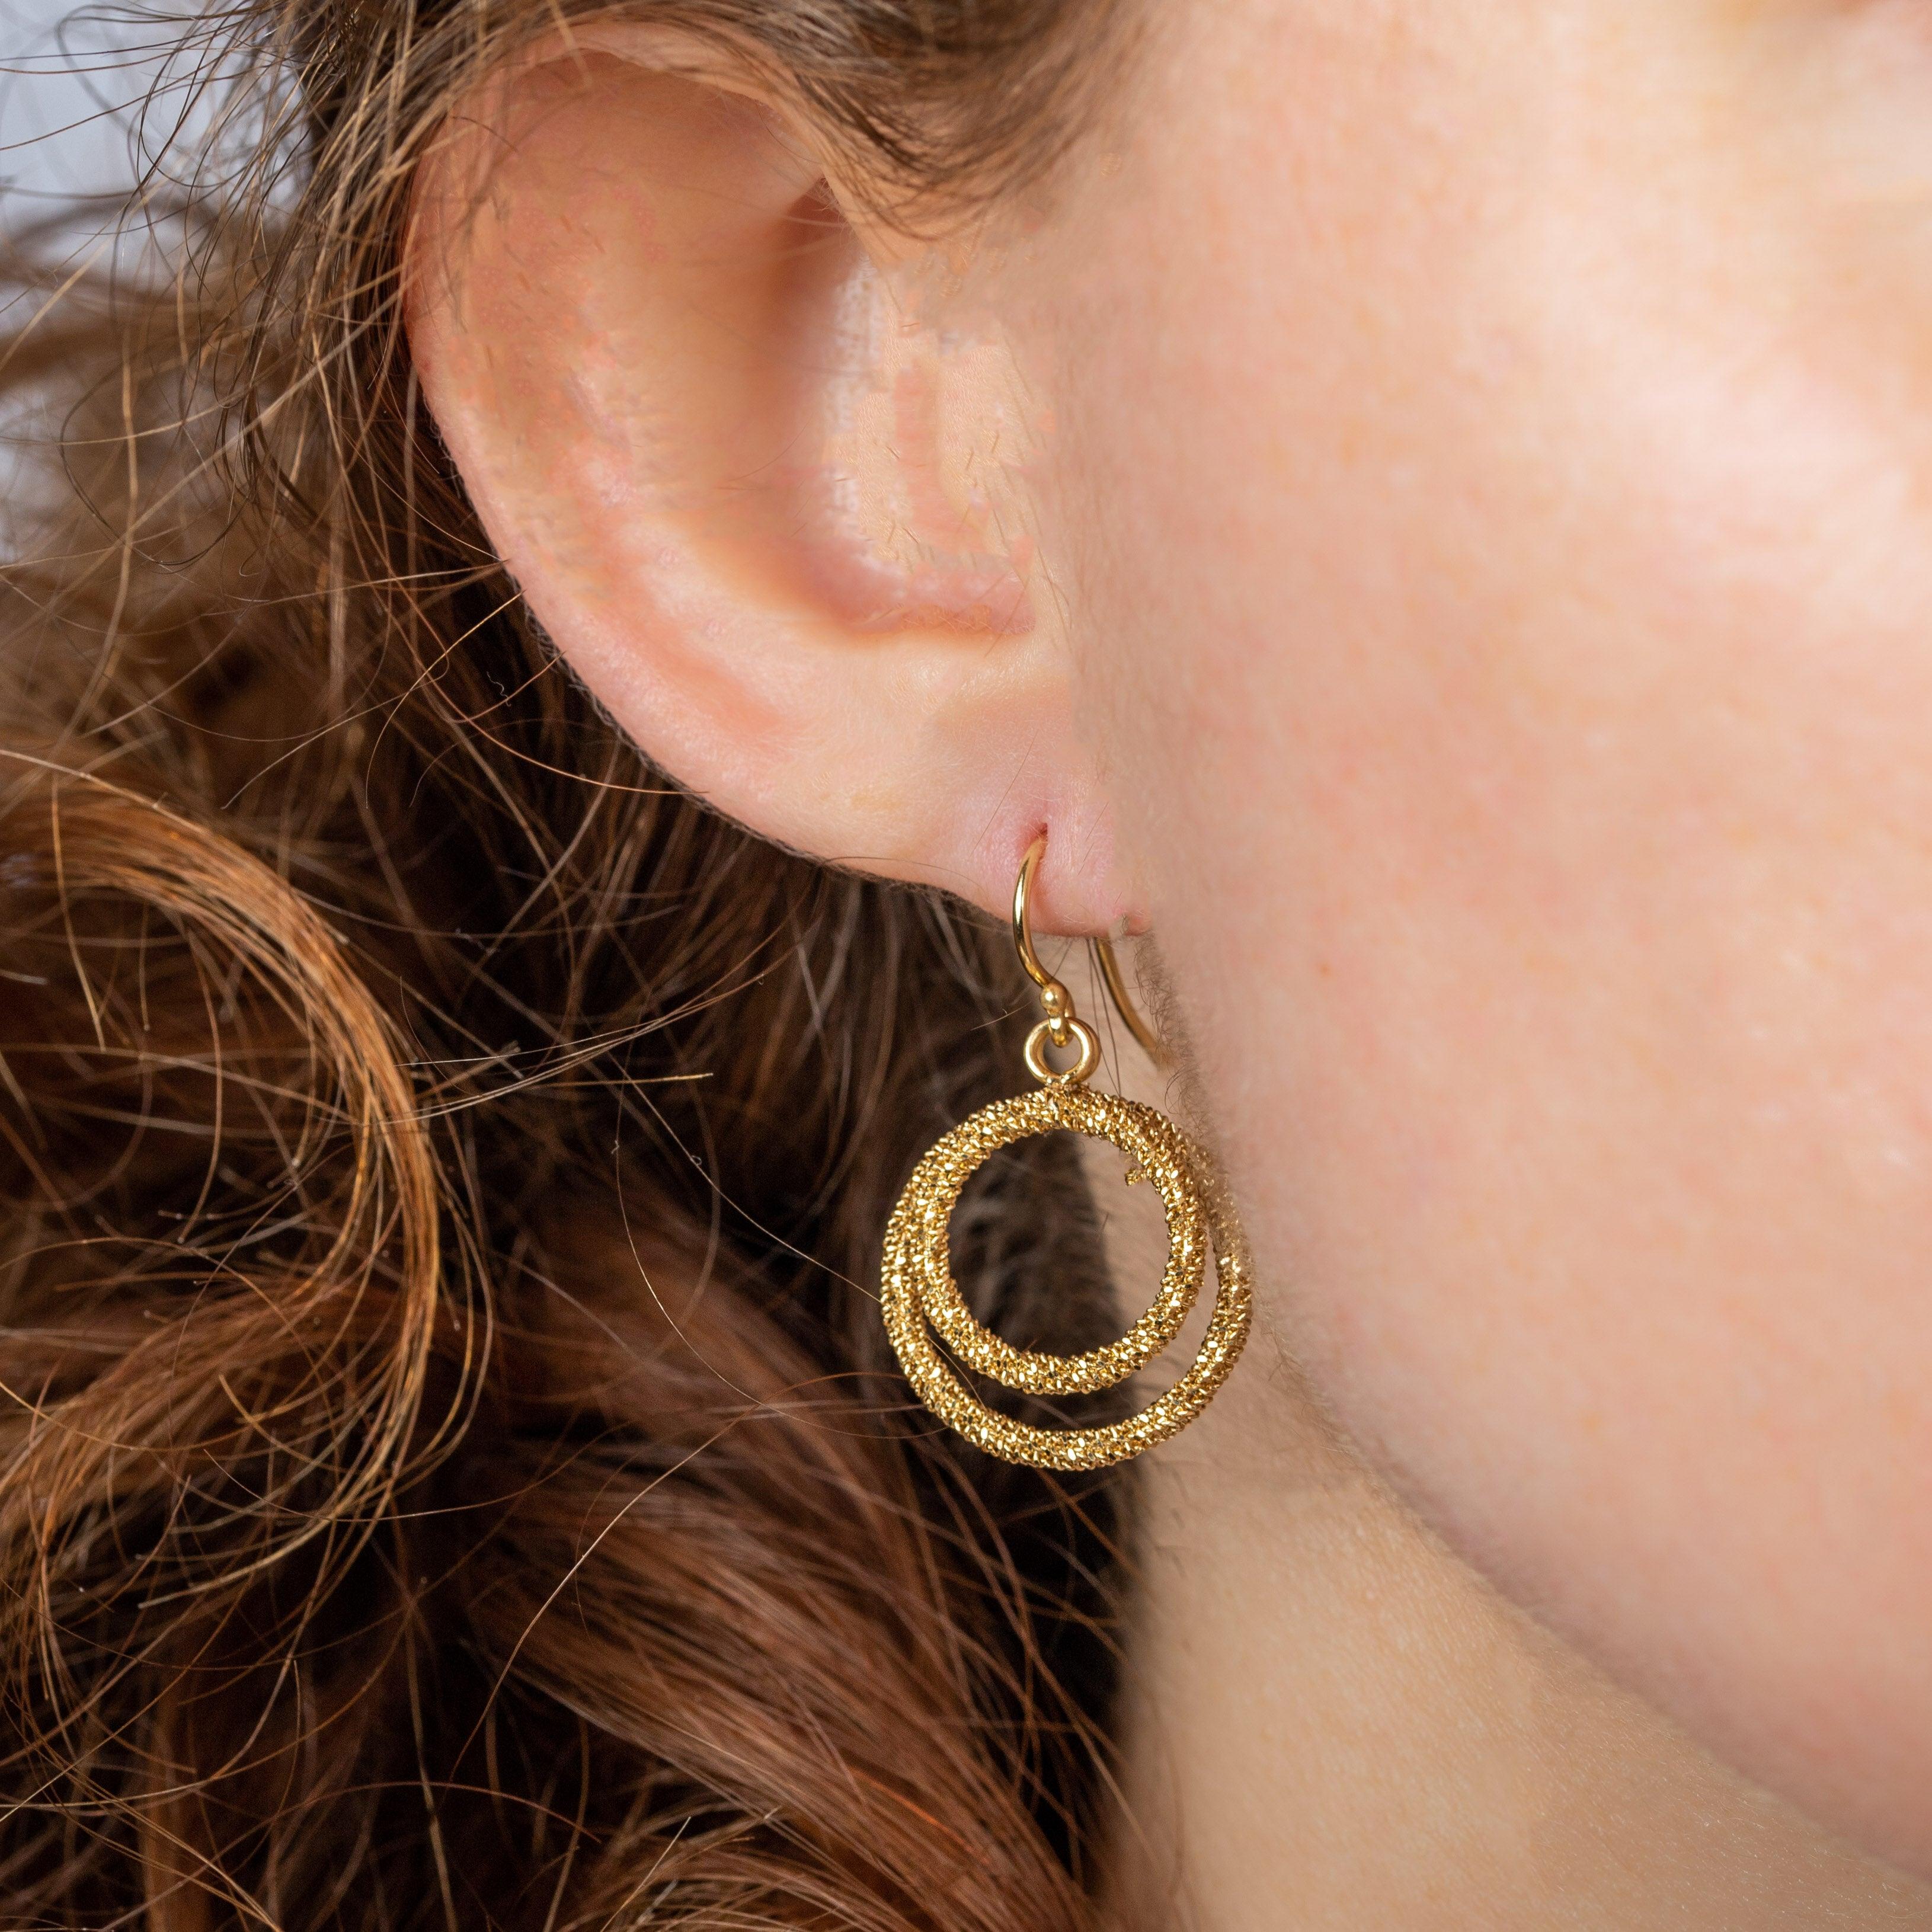 Slender whispers of hand-woven gold, these light and lovely earrings play with negative space to make a compelling statement. Each duo of open circles is meticulously crafted from diamond-cut 18K yellow gold chain for a richly textured effect that